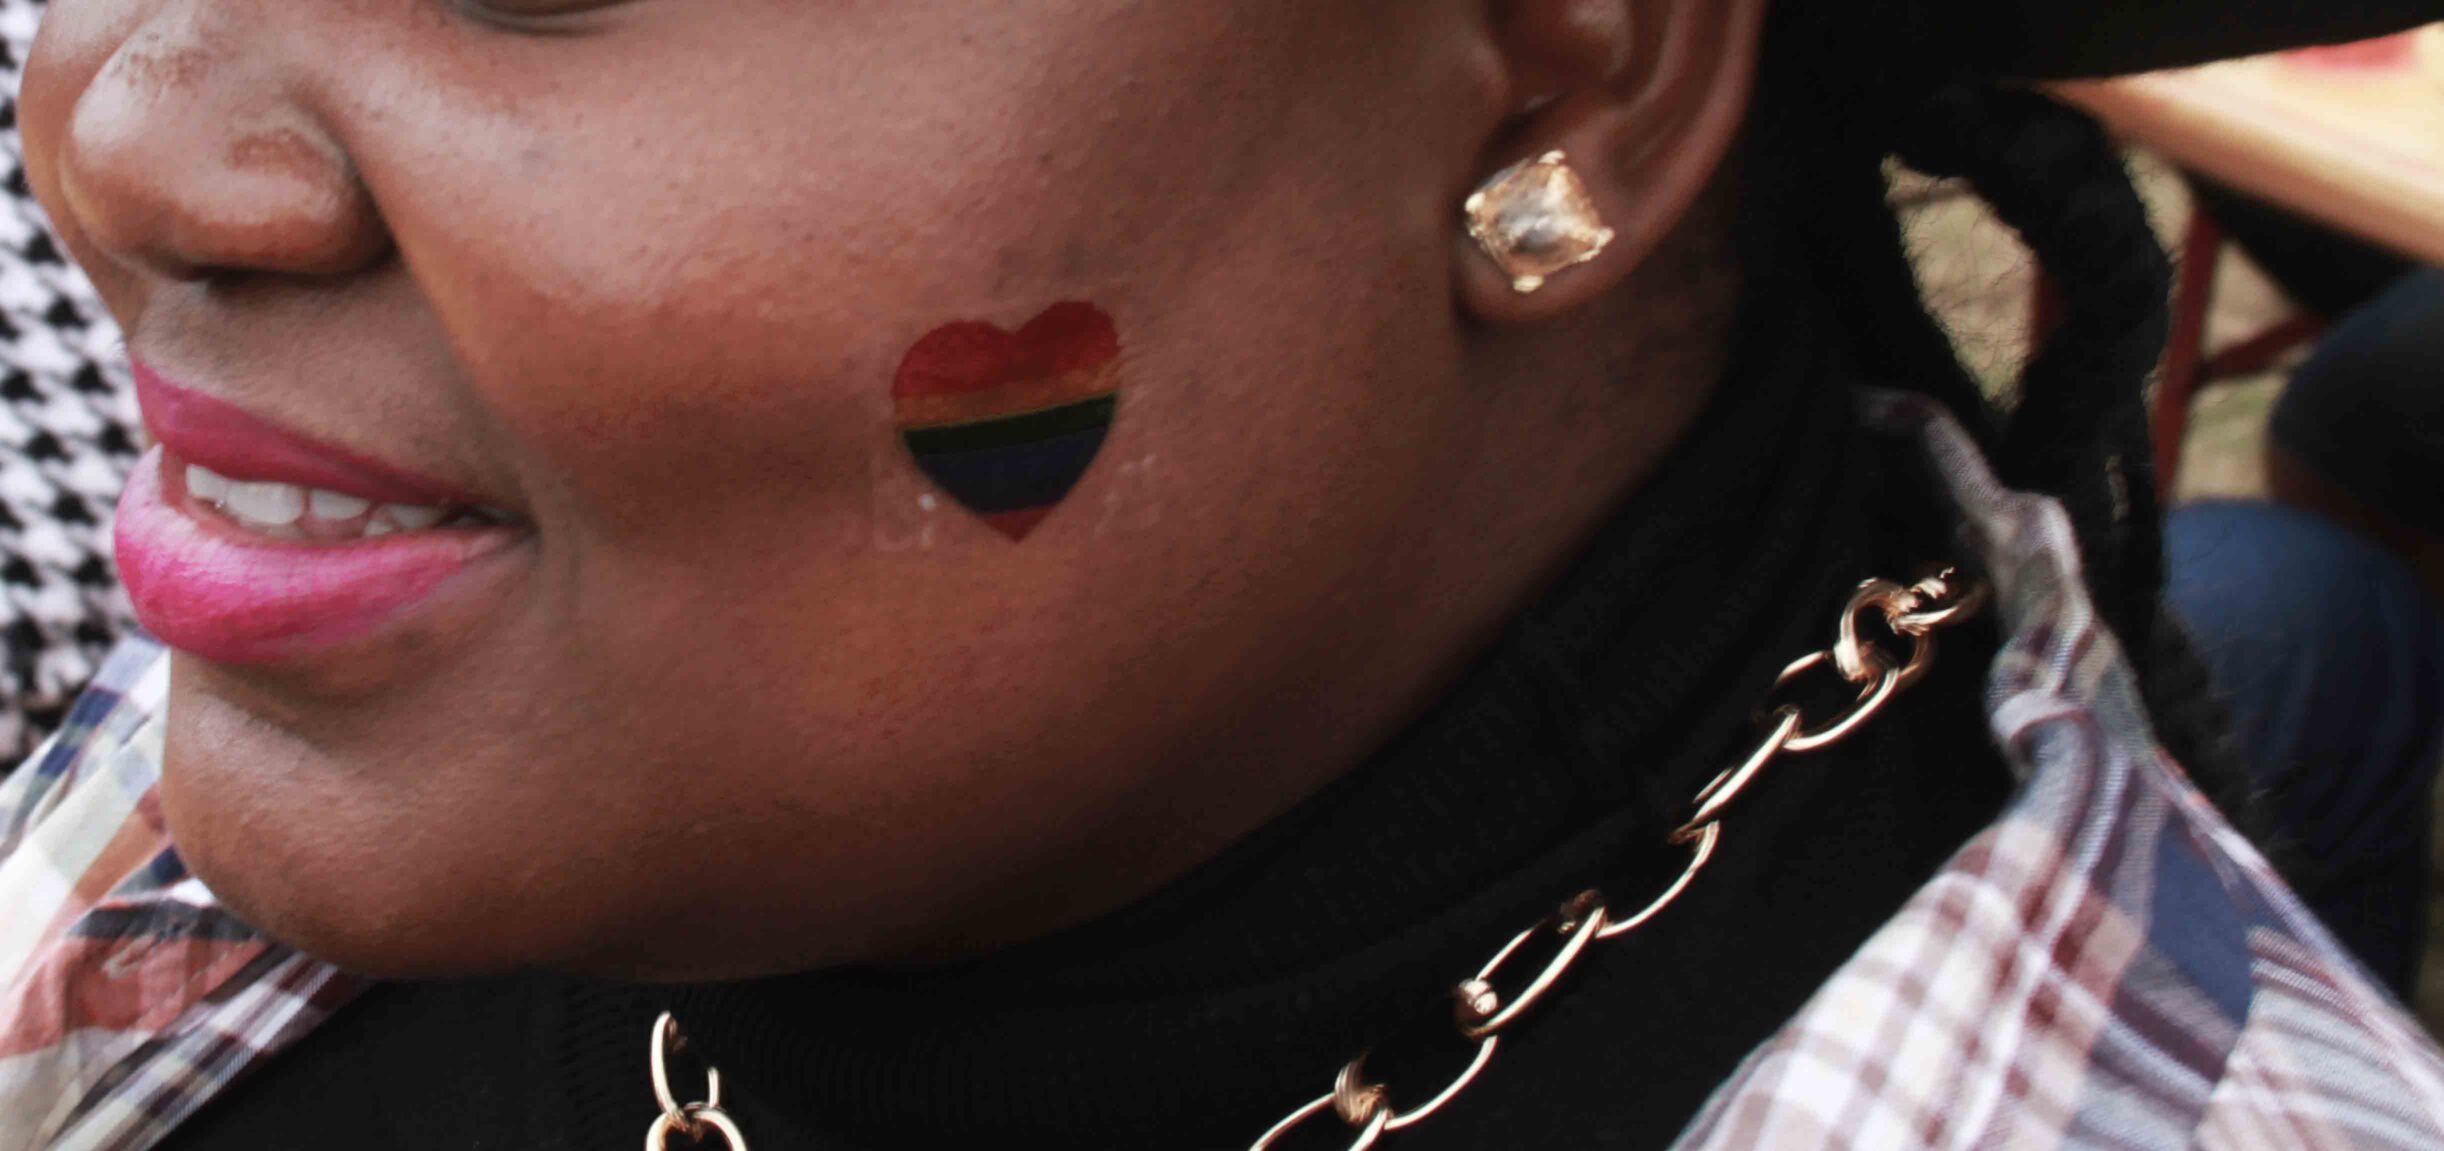 Not all queers want to be queens: The dominant to precarious queer spectrum